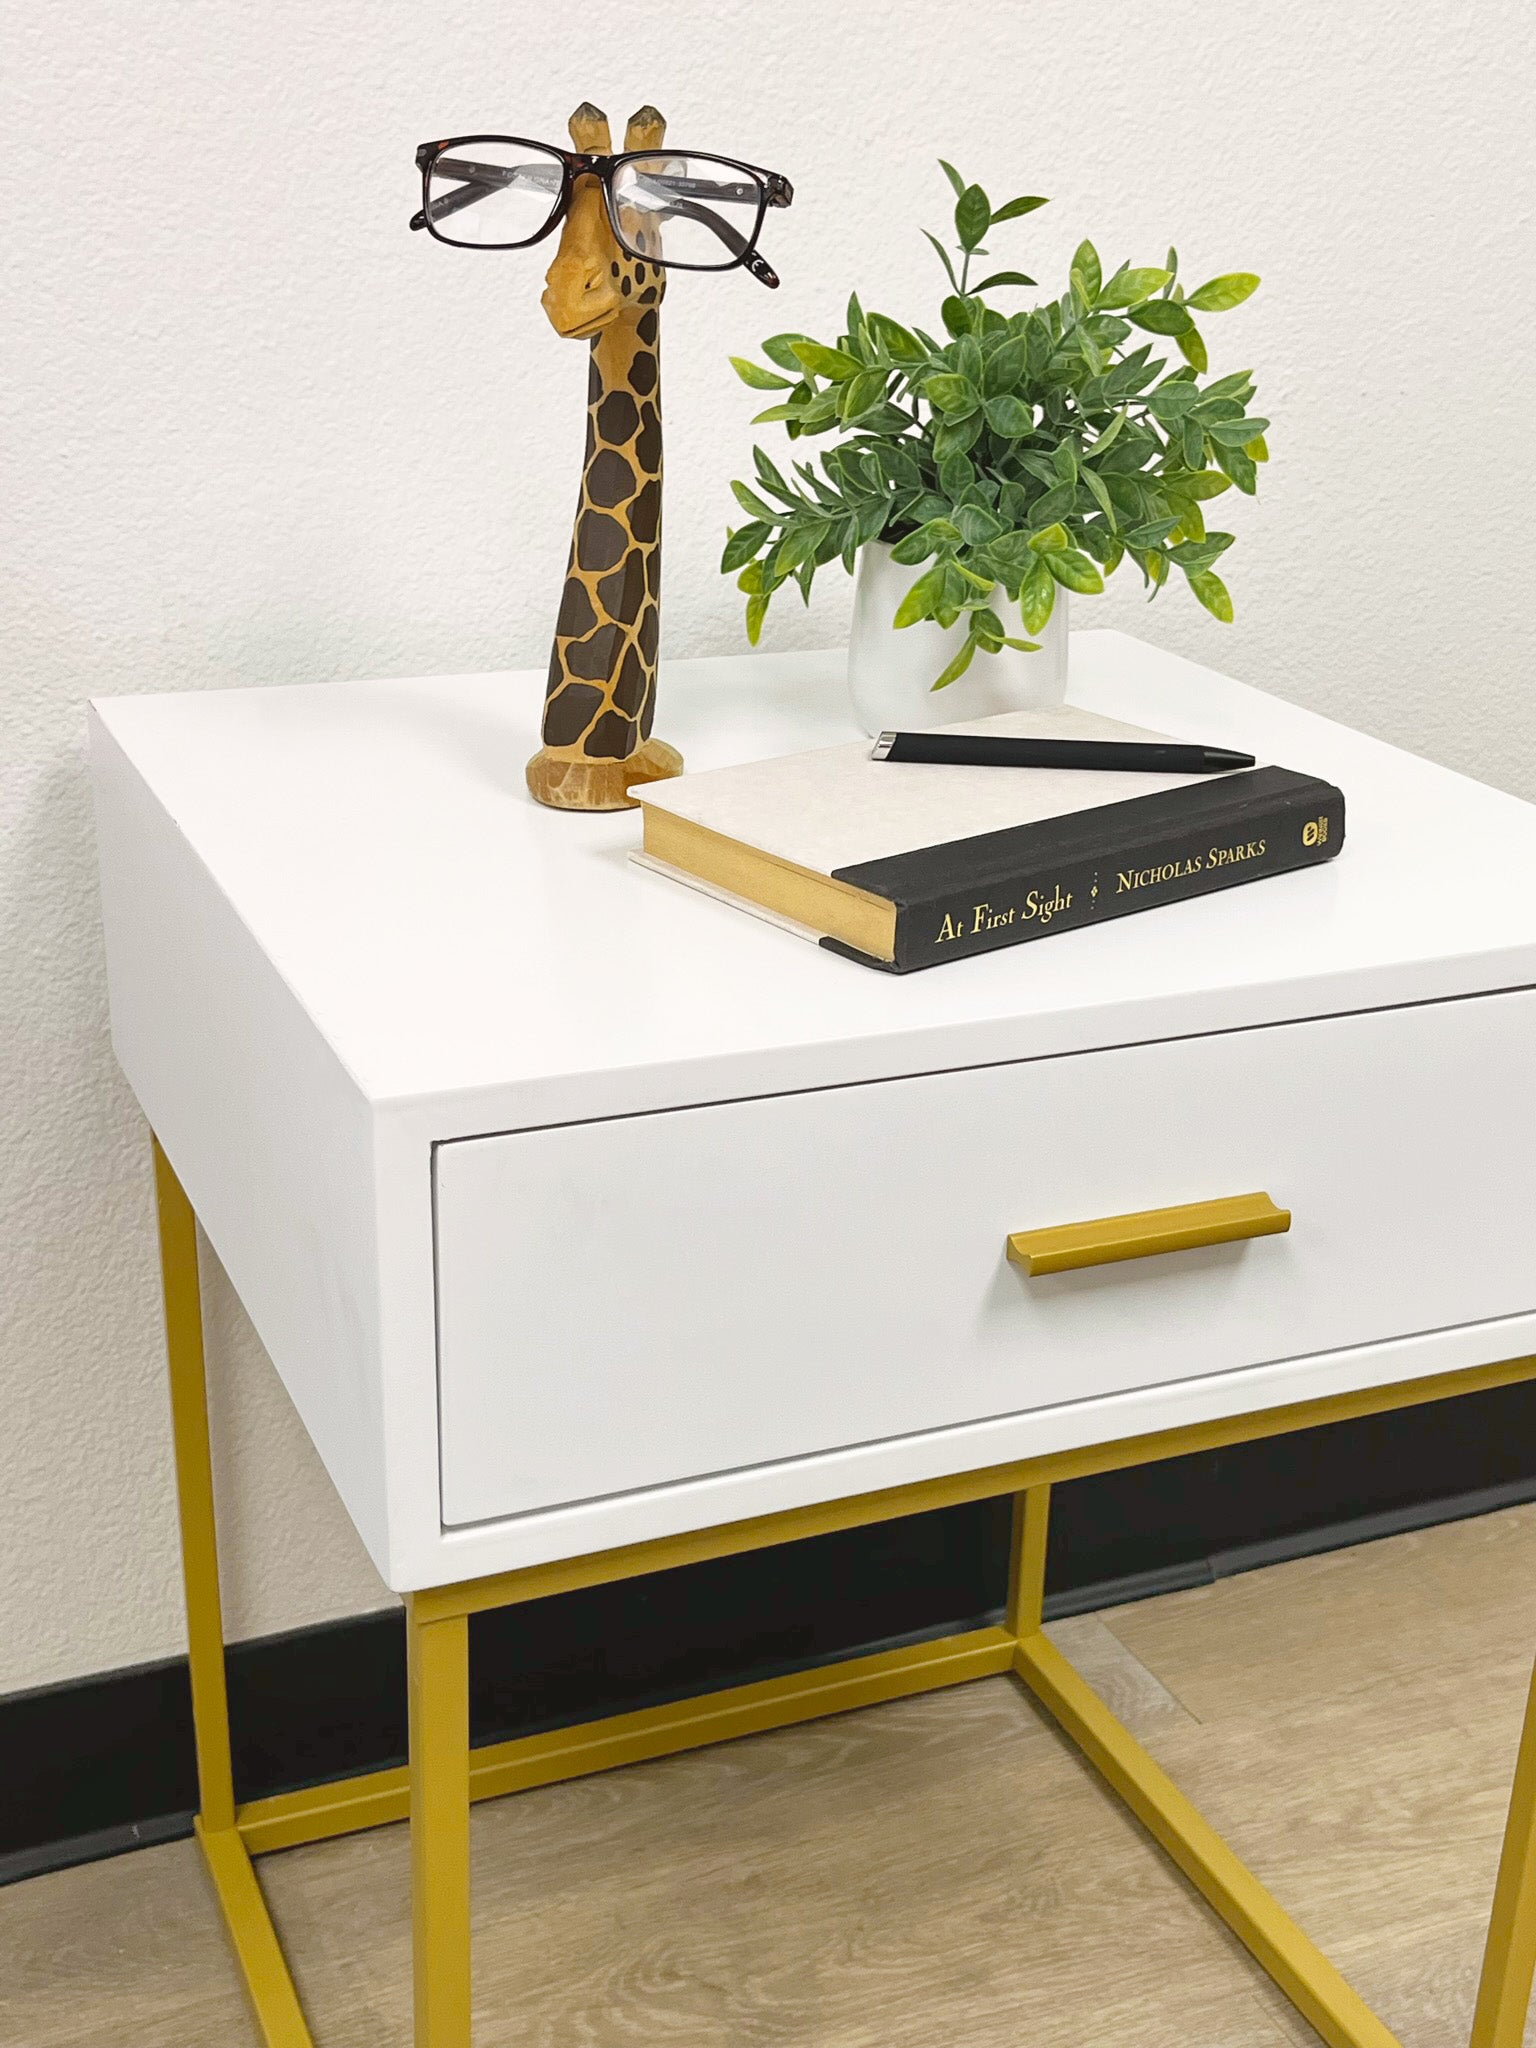 Catalina Nighstand with Gold Legs